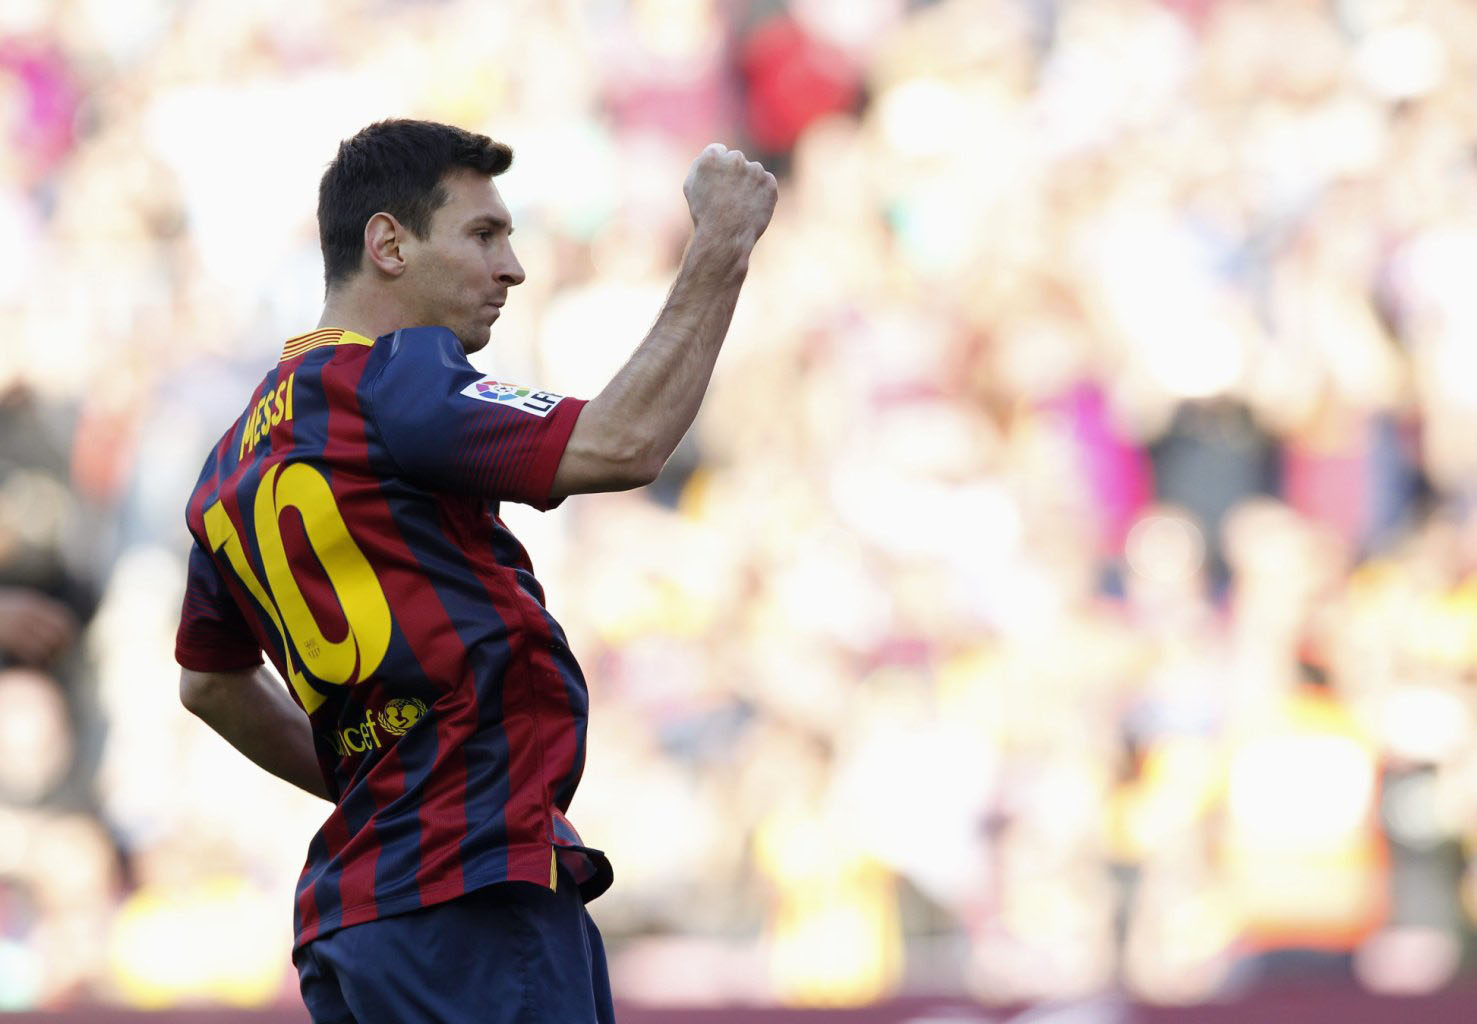 Lionel Messi celebrating another goal in the league